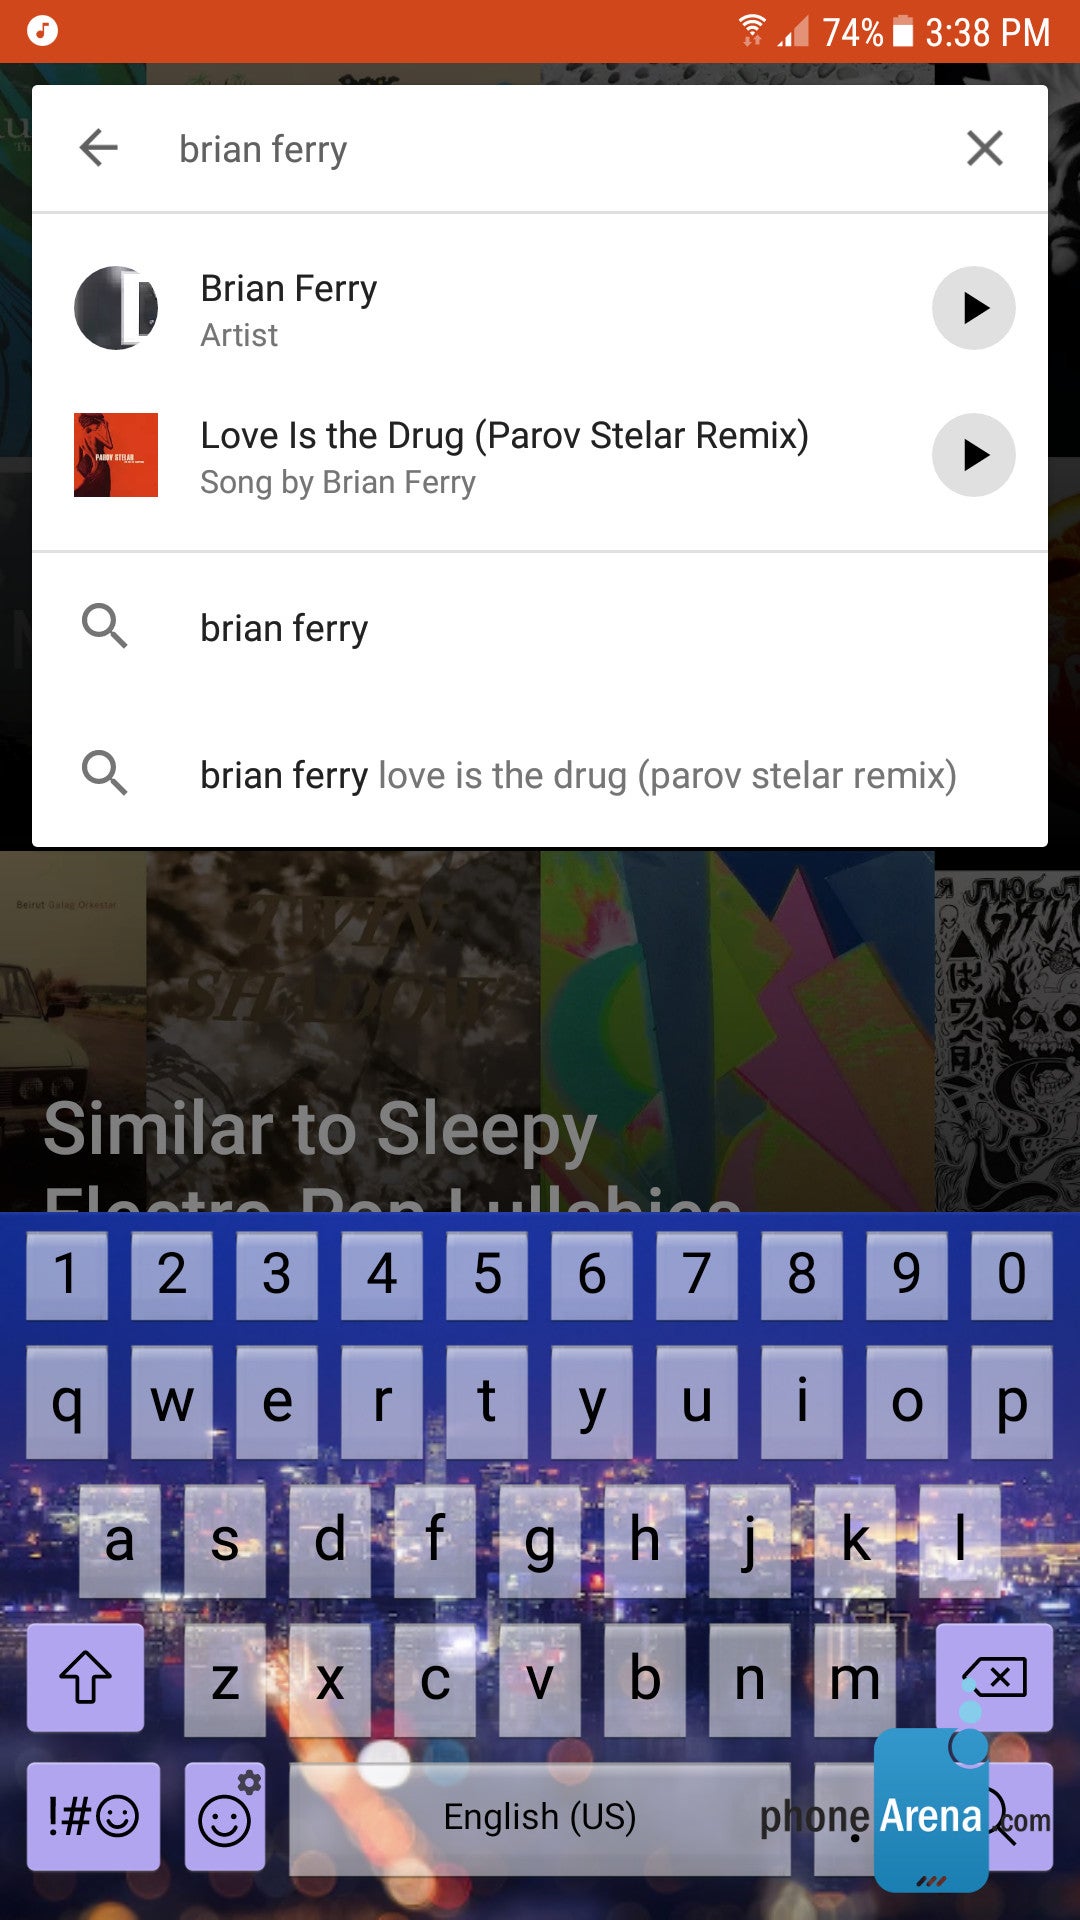 Google Play Music update adds option to listen to songs directly in search